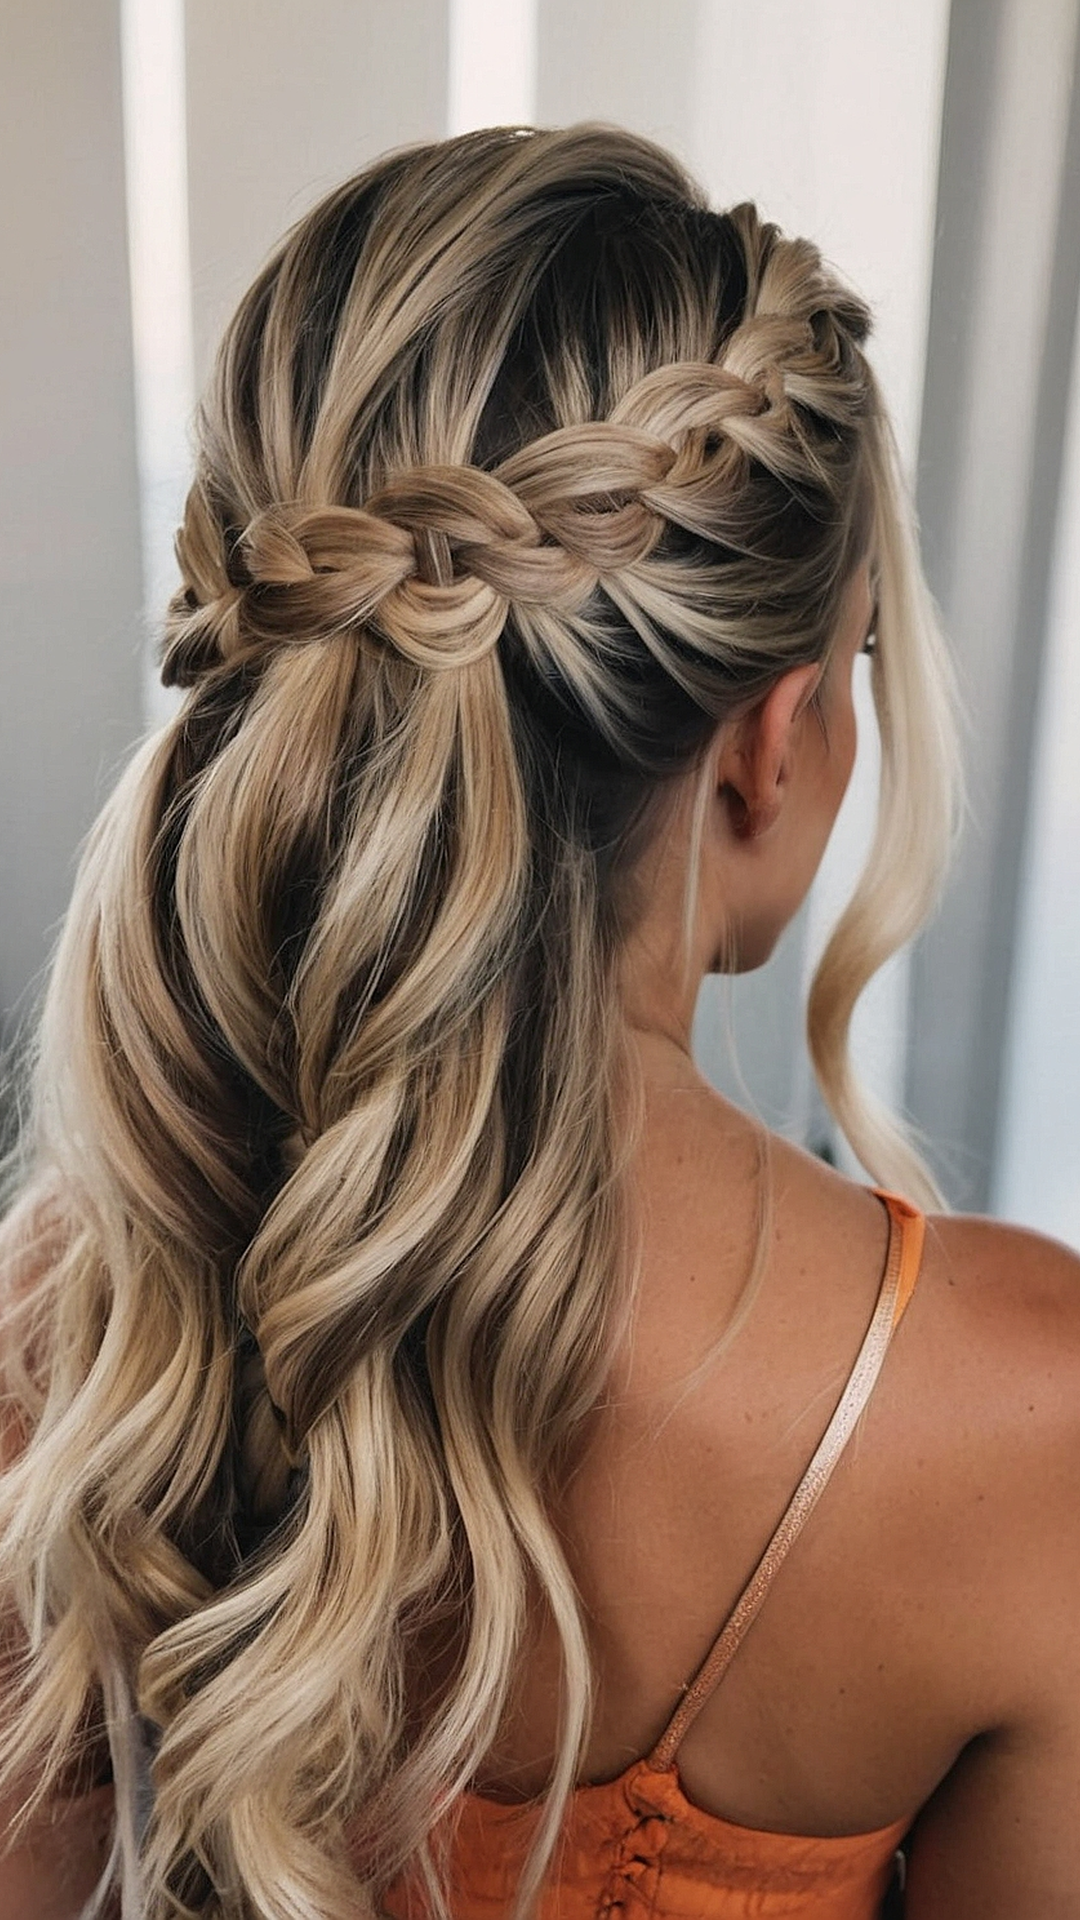 Elevate Your Style: Pretty Braided Hairdos